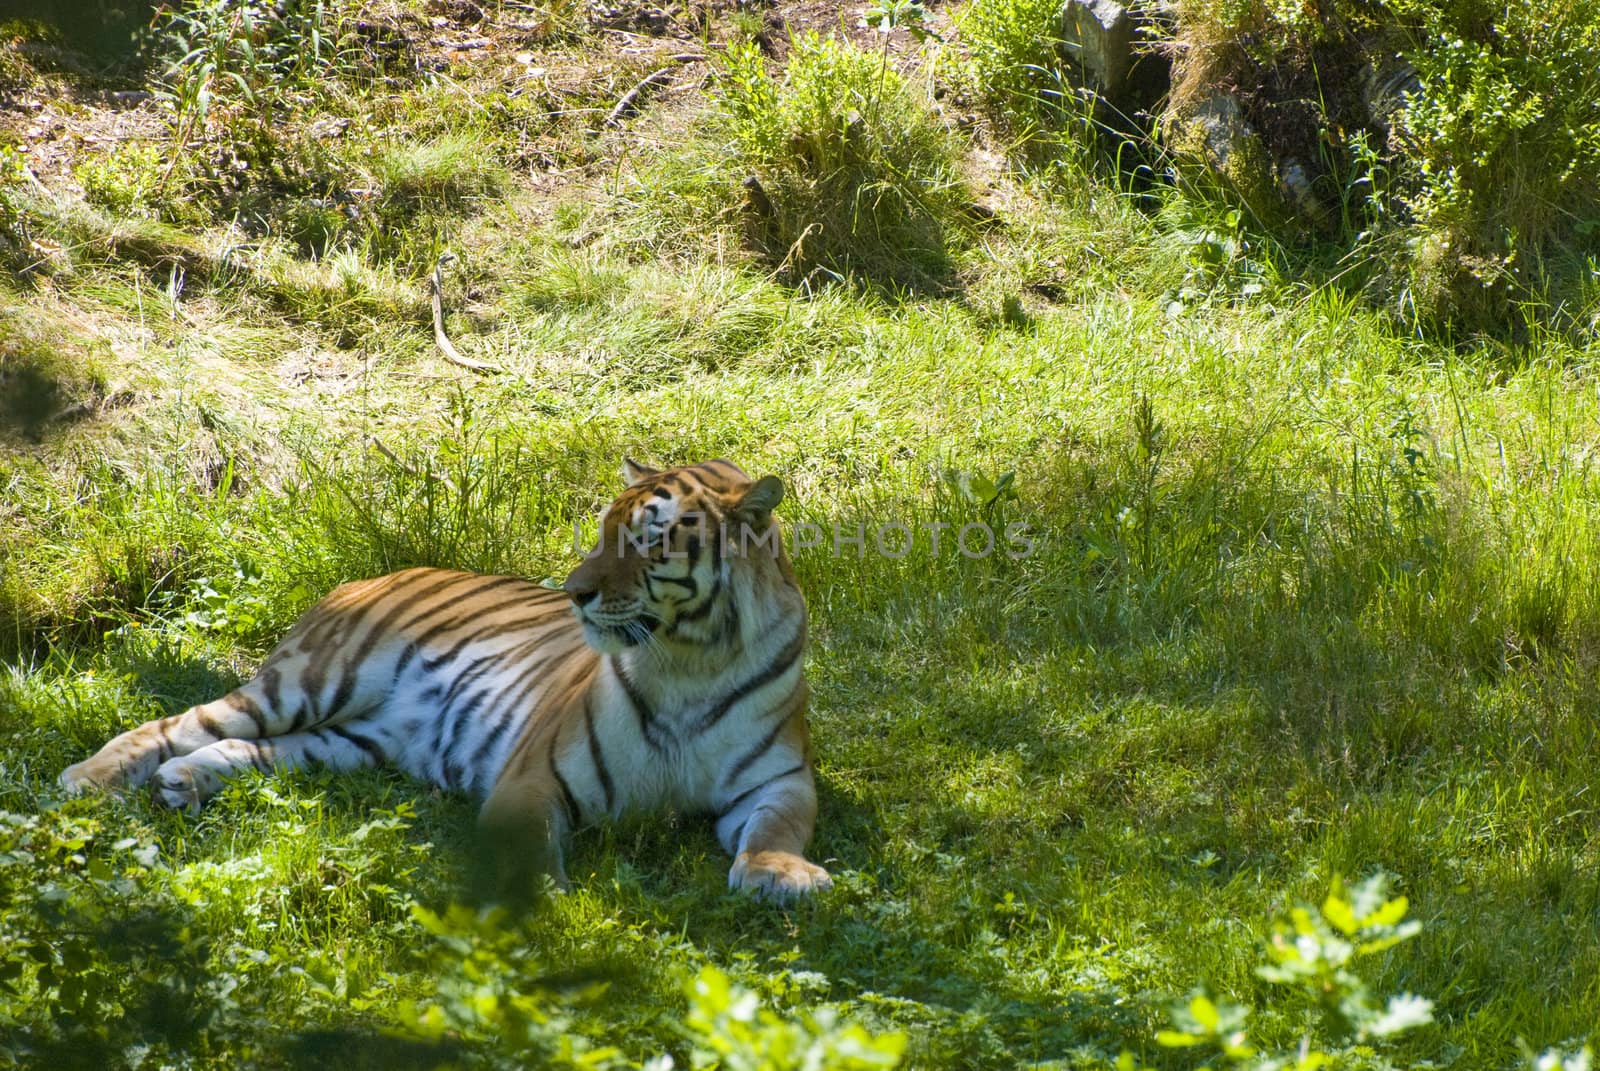 Tiger laying in the grass